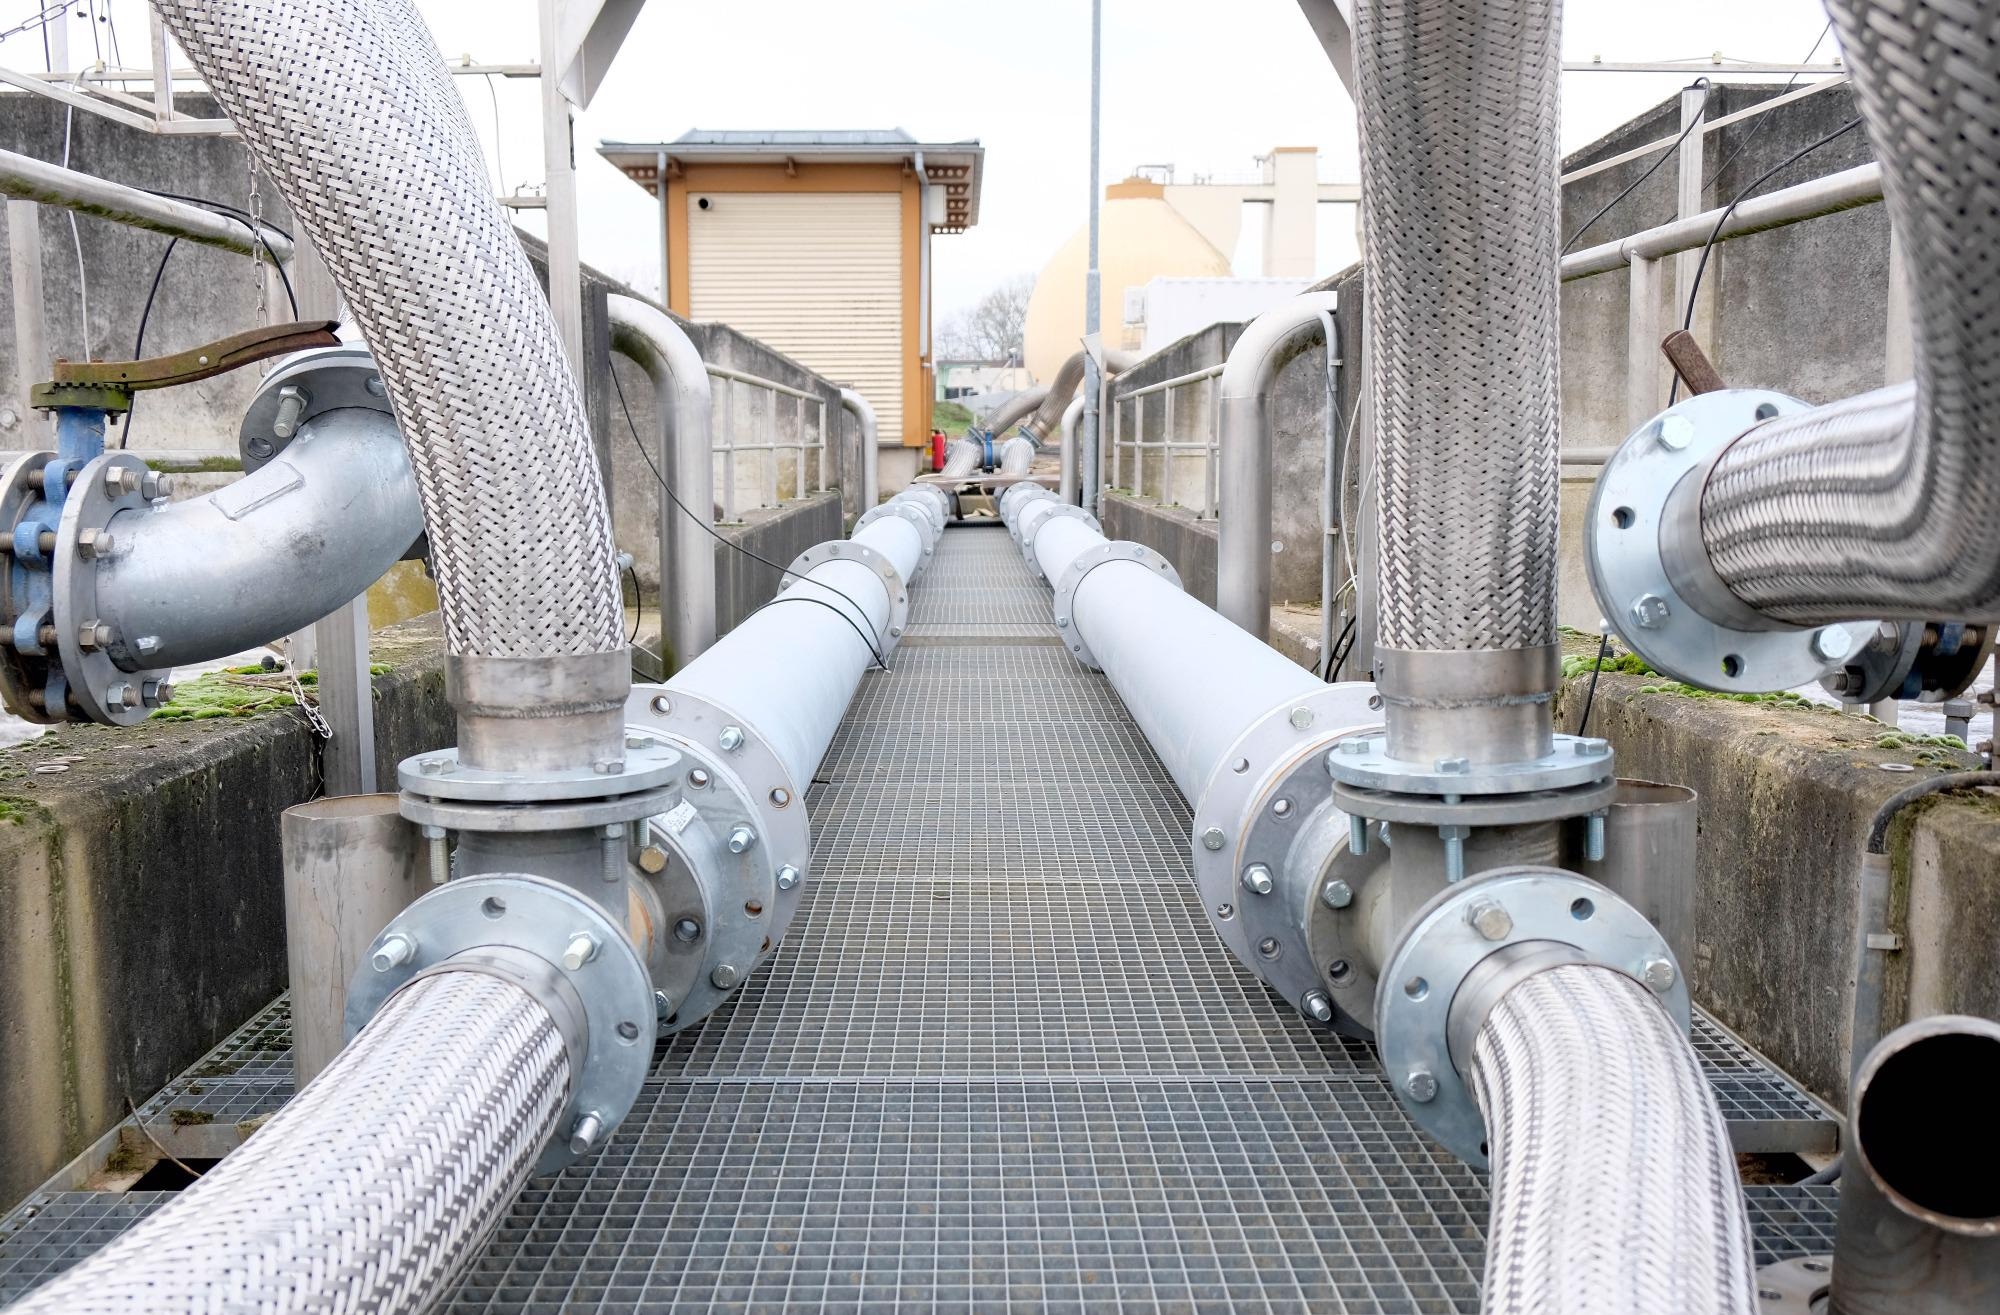 Treating Wastewater with Aerzen Rental